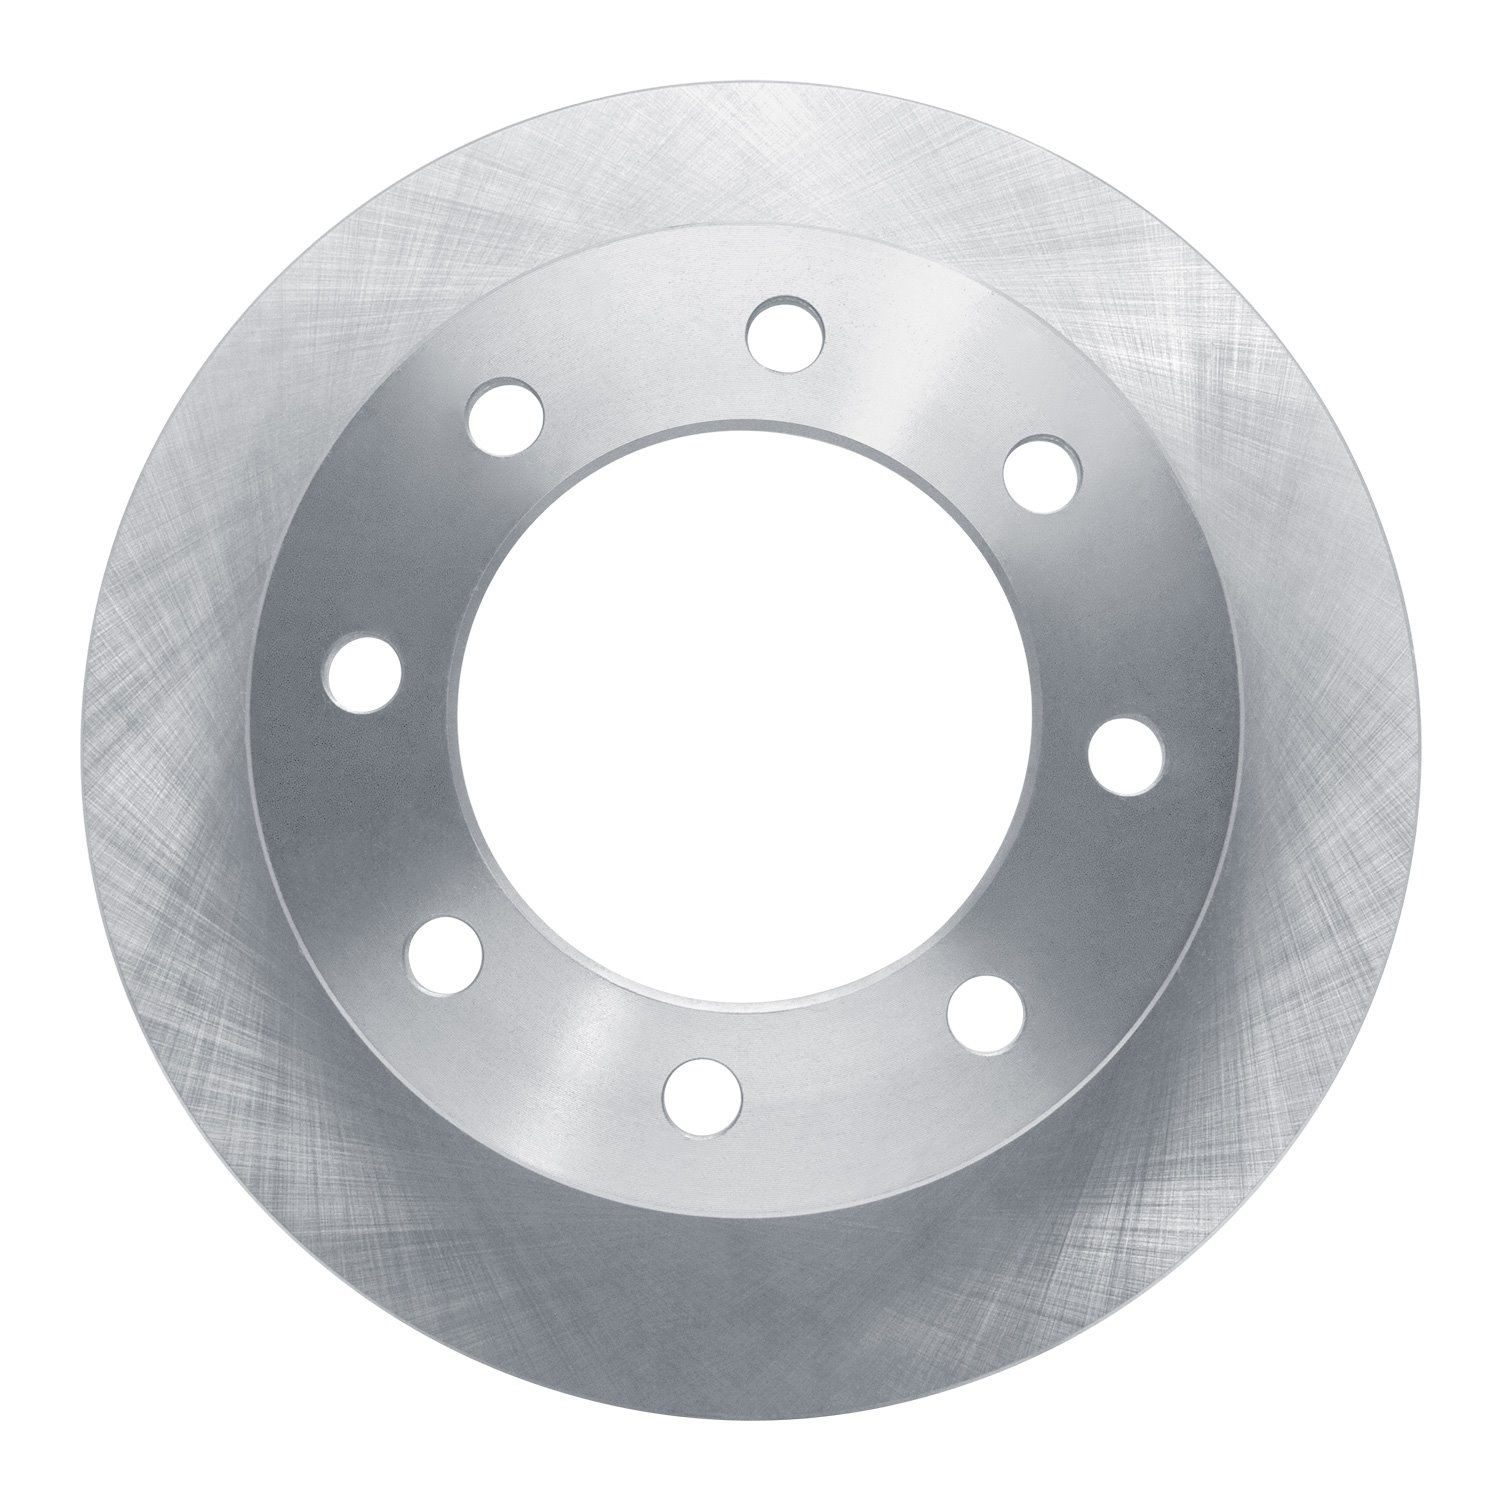 600-47090 Brake Rotor, Fits Select GM, Position: Rear